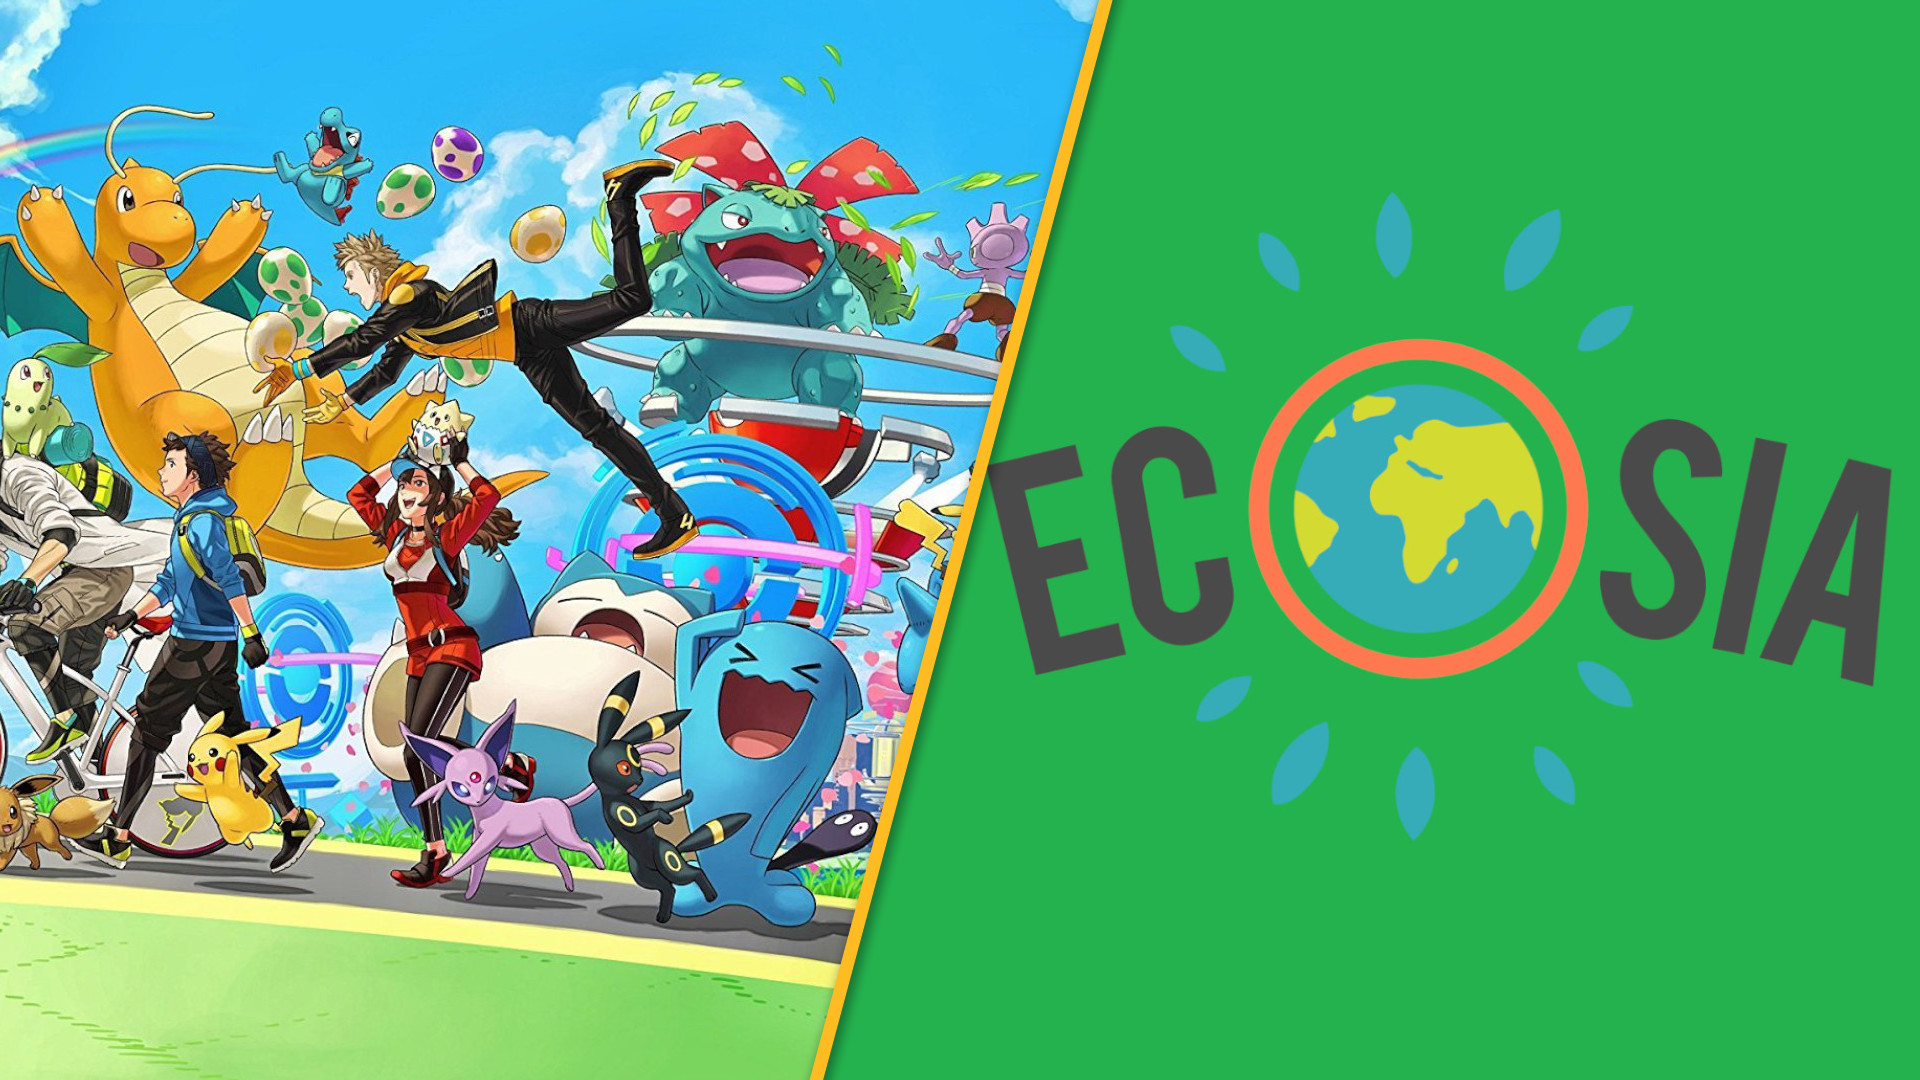 Pokémon Go gets green-fingered for sustainability week